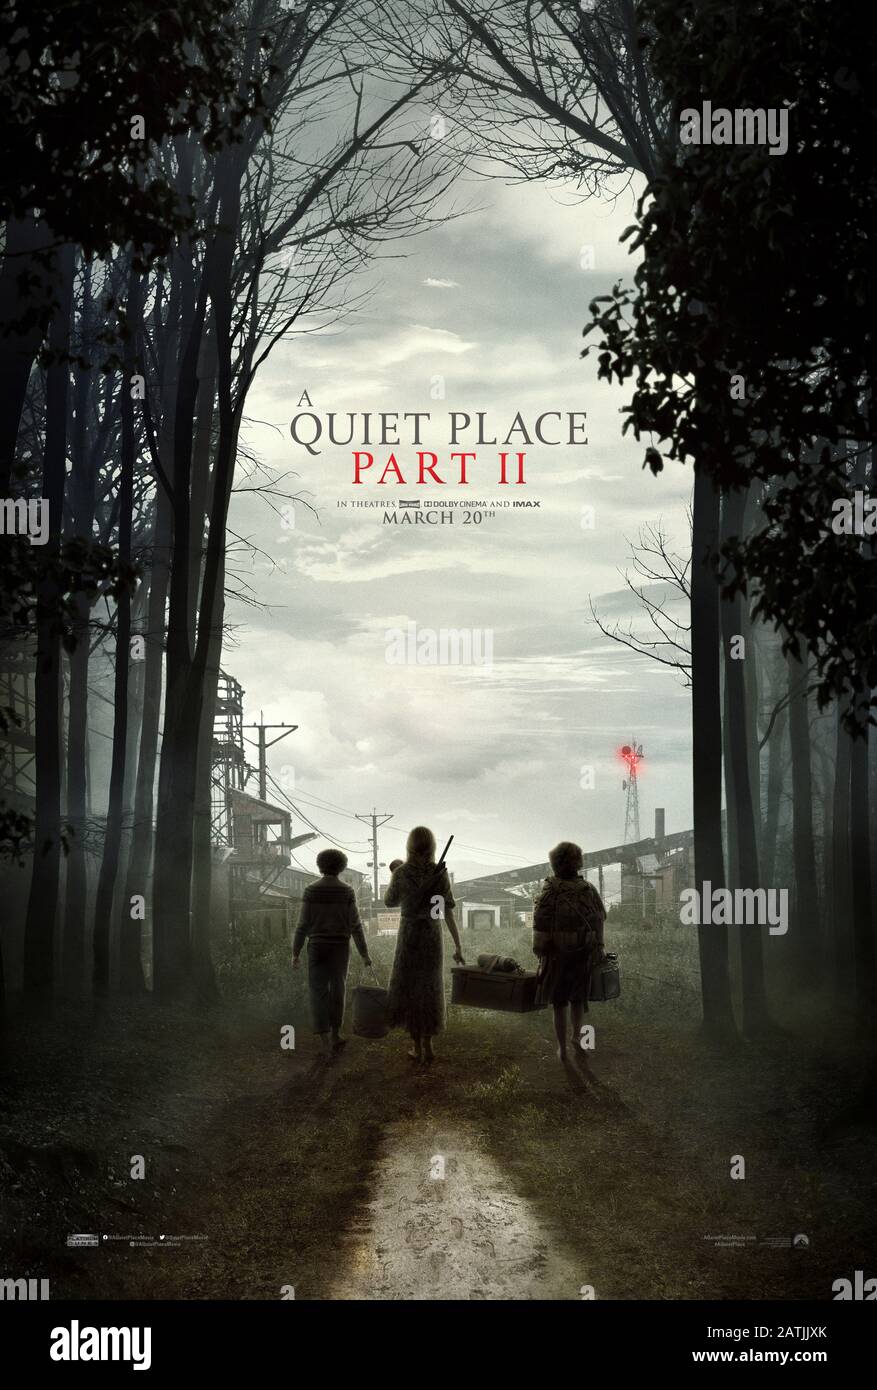 A Quiet Place: Part II (2020) directed by John Krasinski and starring Cillian Murphy, John Krasinski and Emily Blunt. Sequel following the Abbott family's journey and the discovery of new dangers. Stock Photo